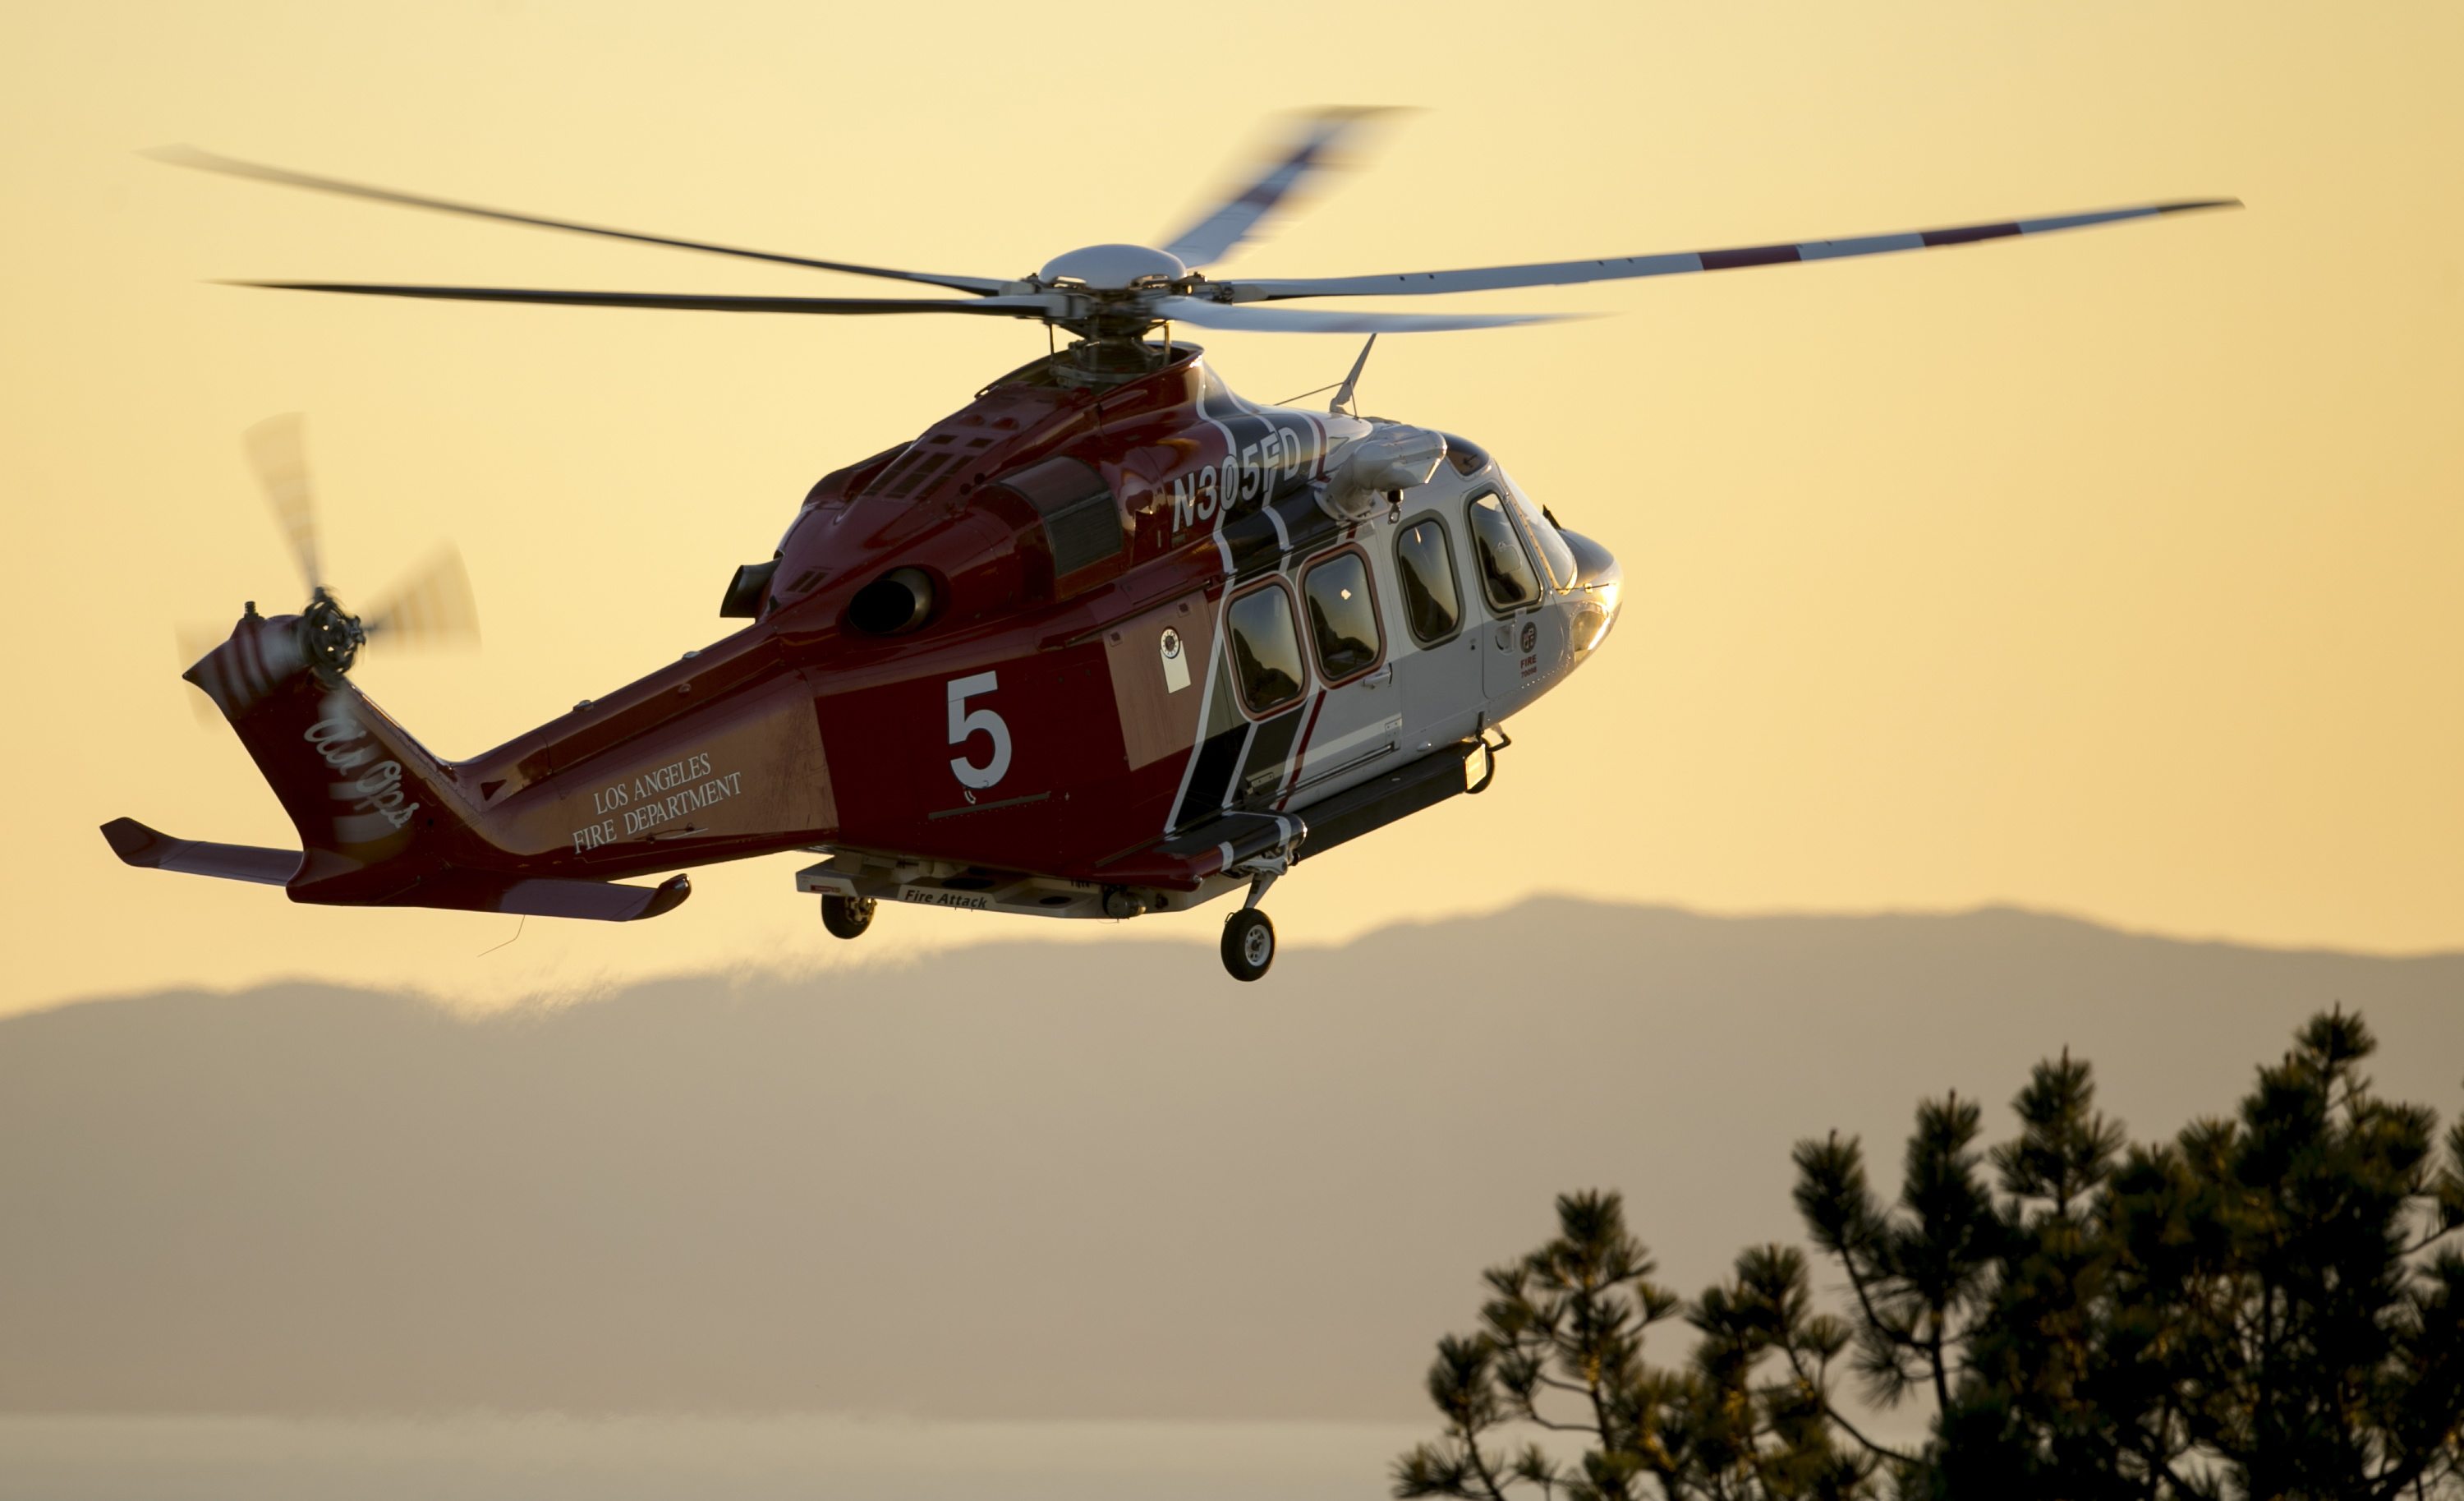 A Los Angeles County Fire helicopter gets ready to land at Angels Gate Park as rescue boats continue to search for wreckage from two small planes that collided in midair and plunged into the ocean off of Los Angeles harbor Friday. The planes apparently went into the water about 2 miles outside the harbor entrance, U.S. Coast Guard and other officials said.